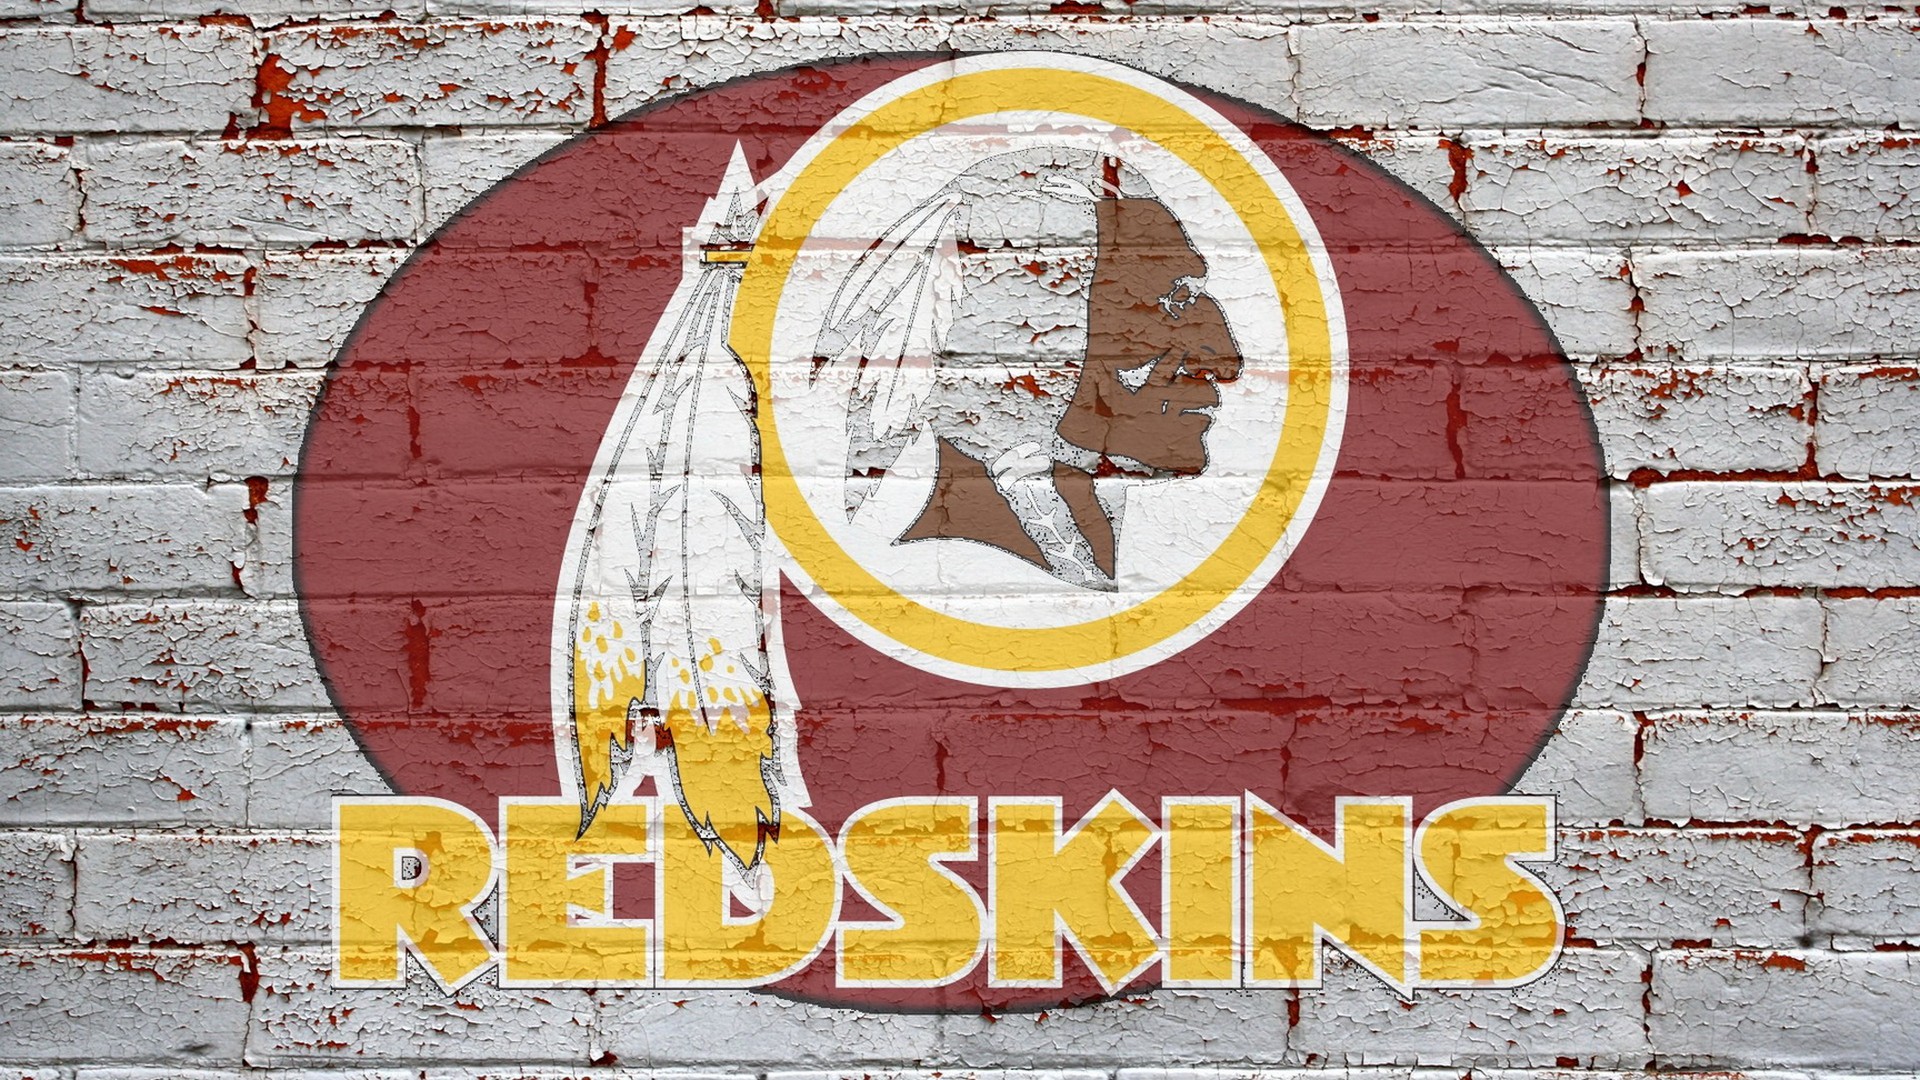 Best Washington Redskins Wallpaper in HD with high-resolution 1920x1080 pixel. Download and set as wallpaper for Desktop Computer, Apple iPhone X, XS Max, XR, 8, 7, 6, SE, iPad, Android